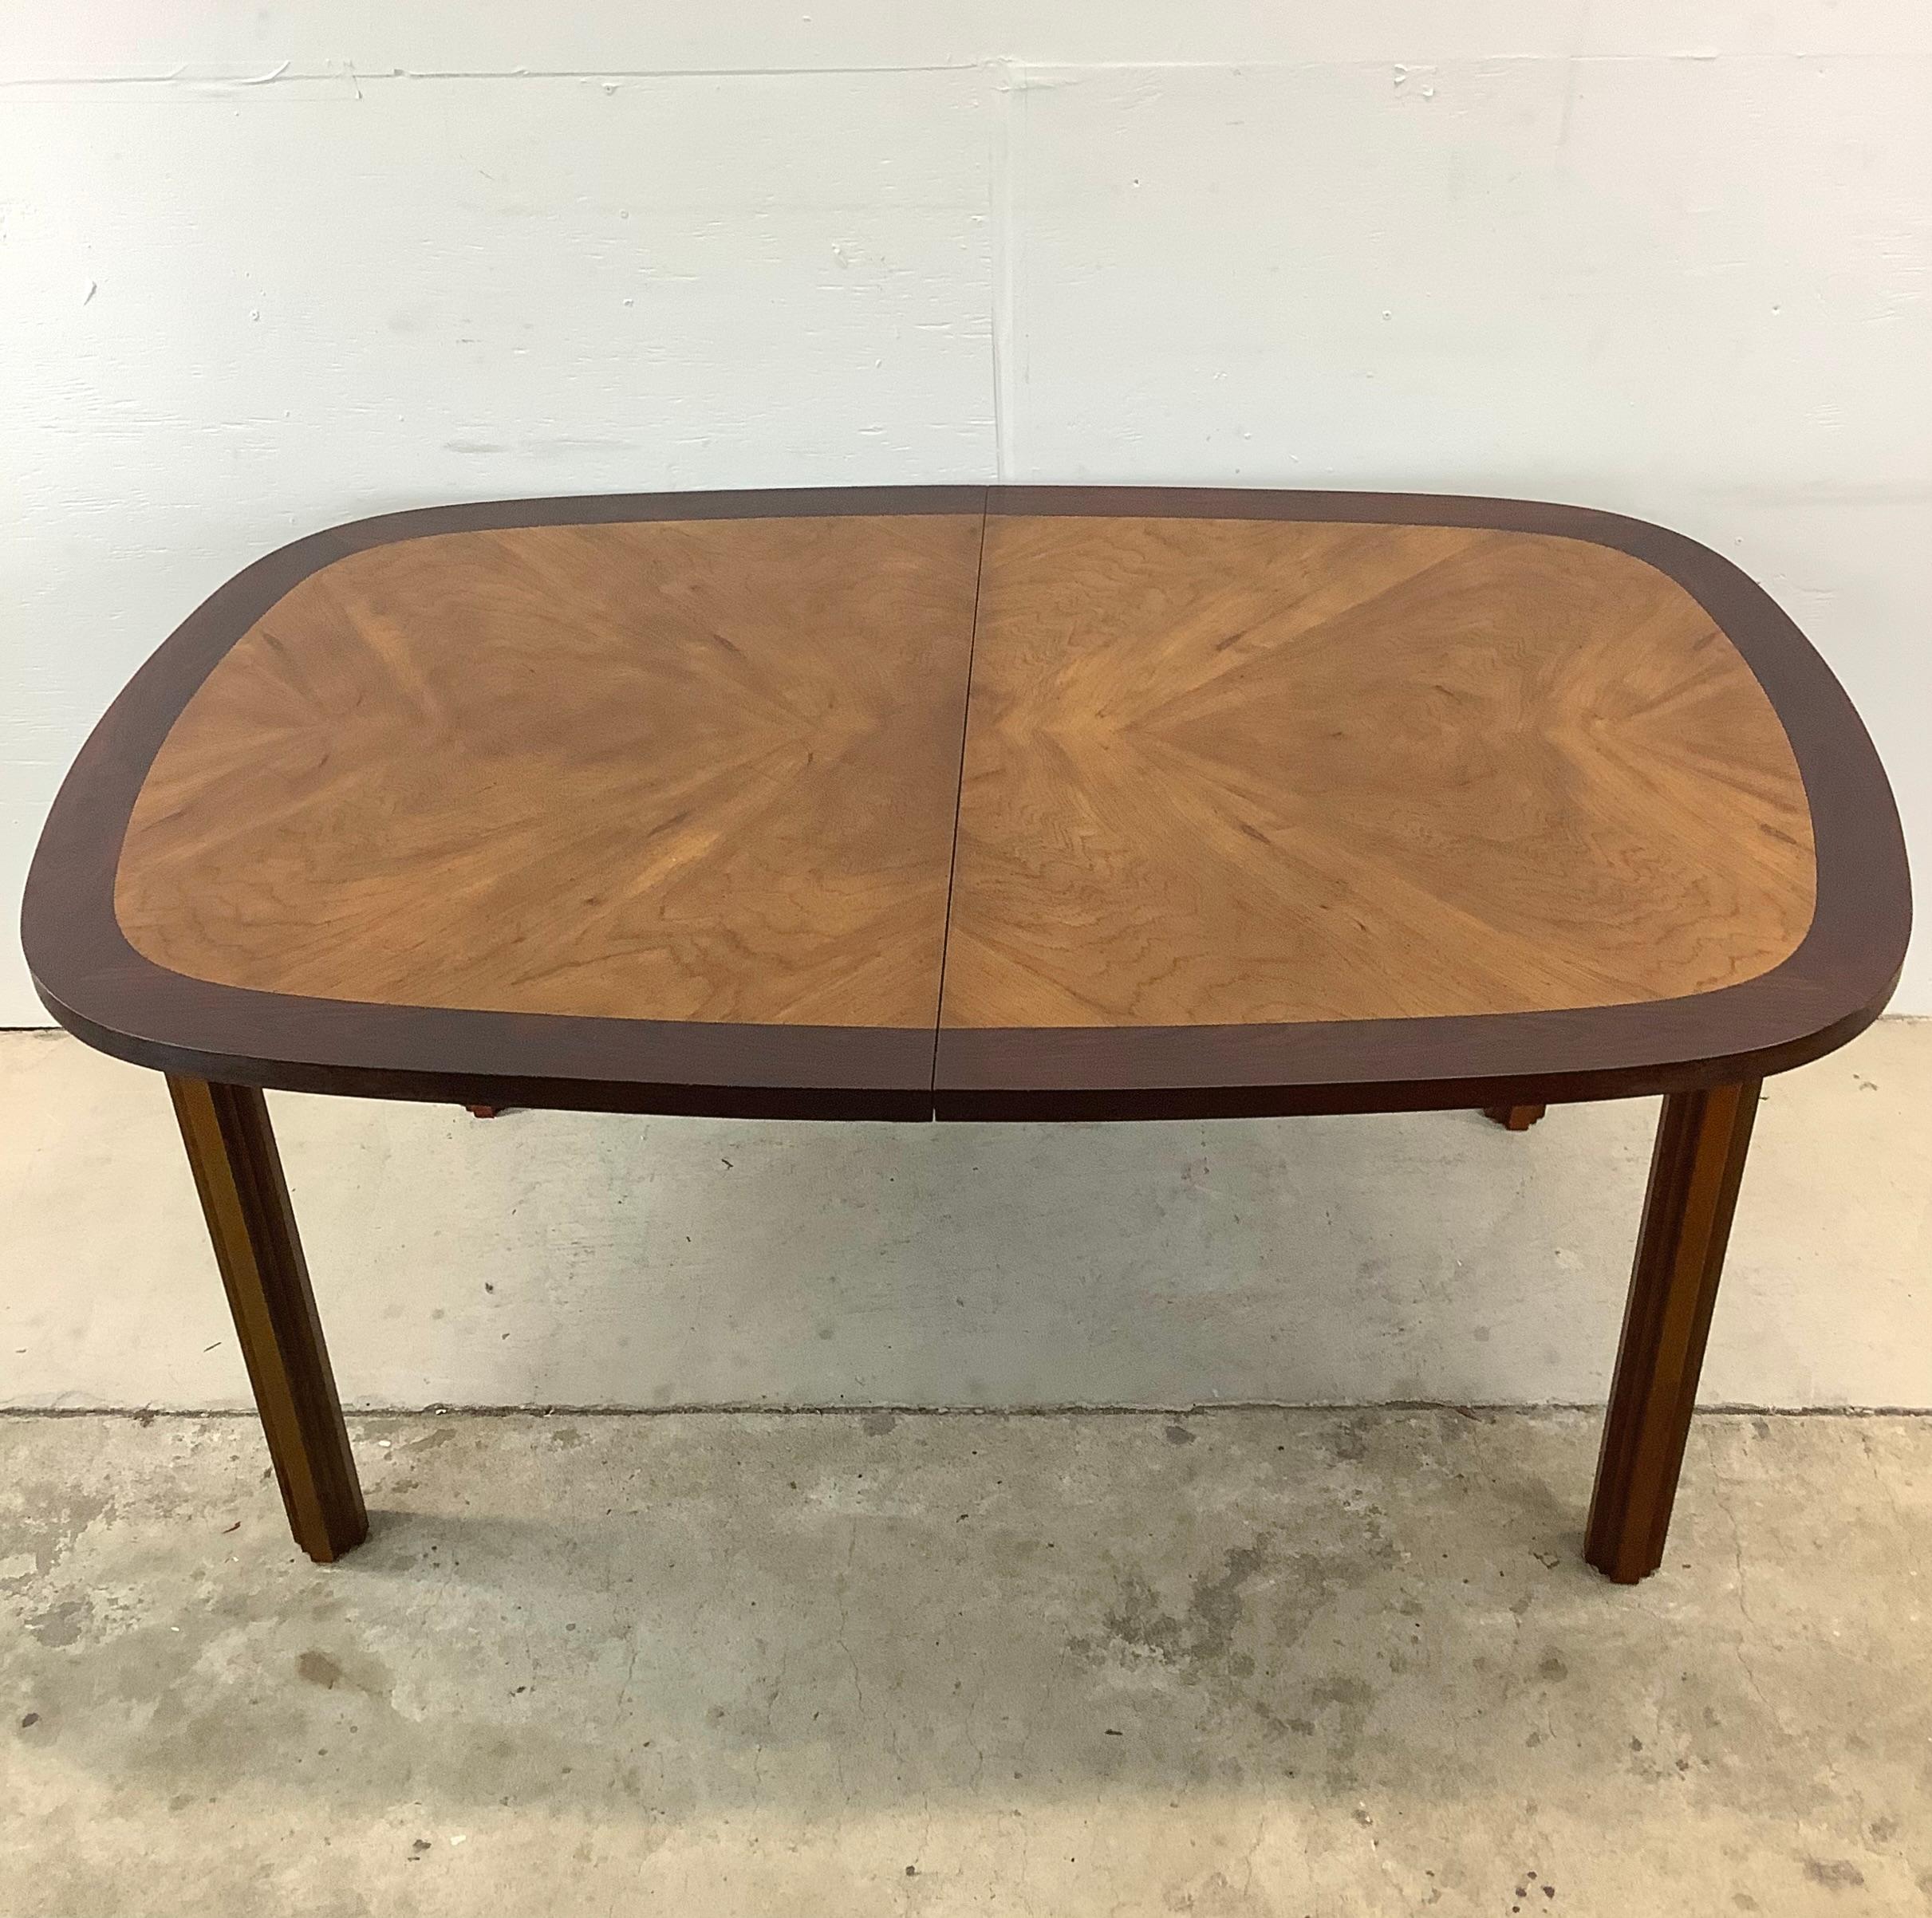 Step into a world of timeless elegance with this multi-tone Mid-Century Walnut Oval Dining Table in the style of Lane's Tower Suite line. Crafted with meticulous attention to detail, this exquisite piece adds a unique centerpiece to any dining area,